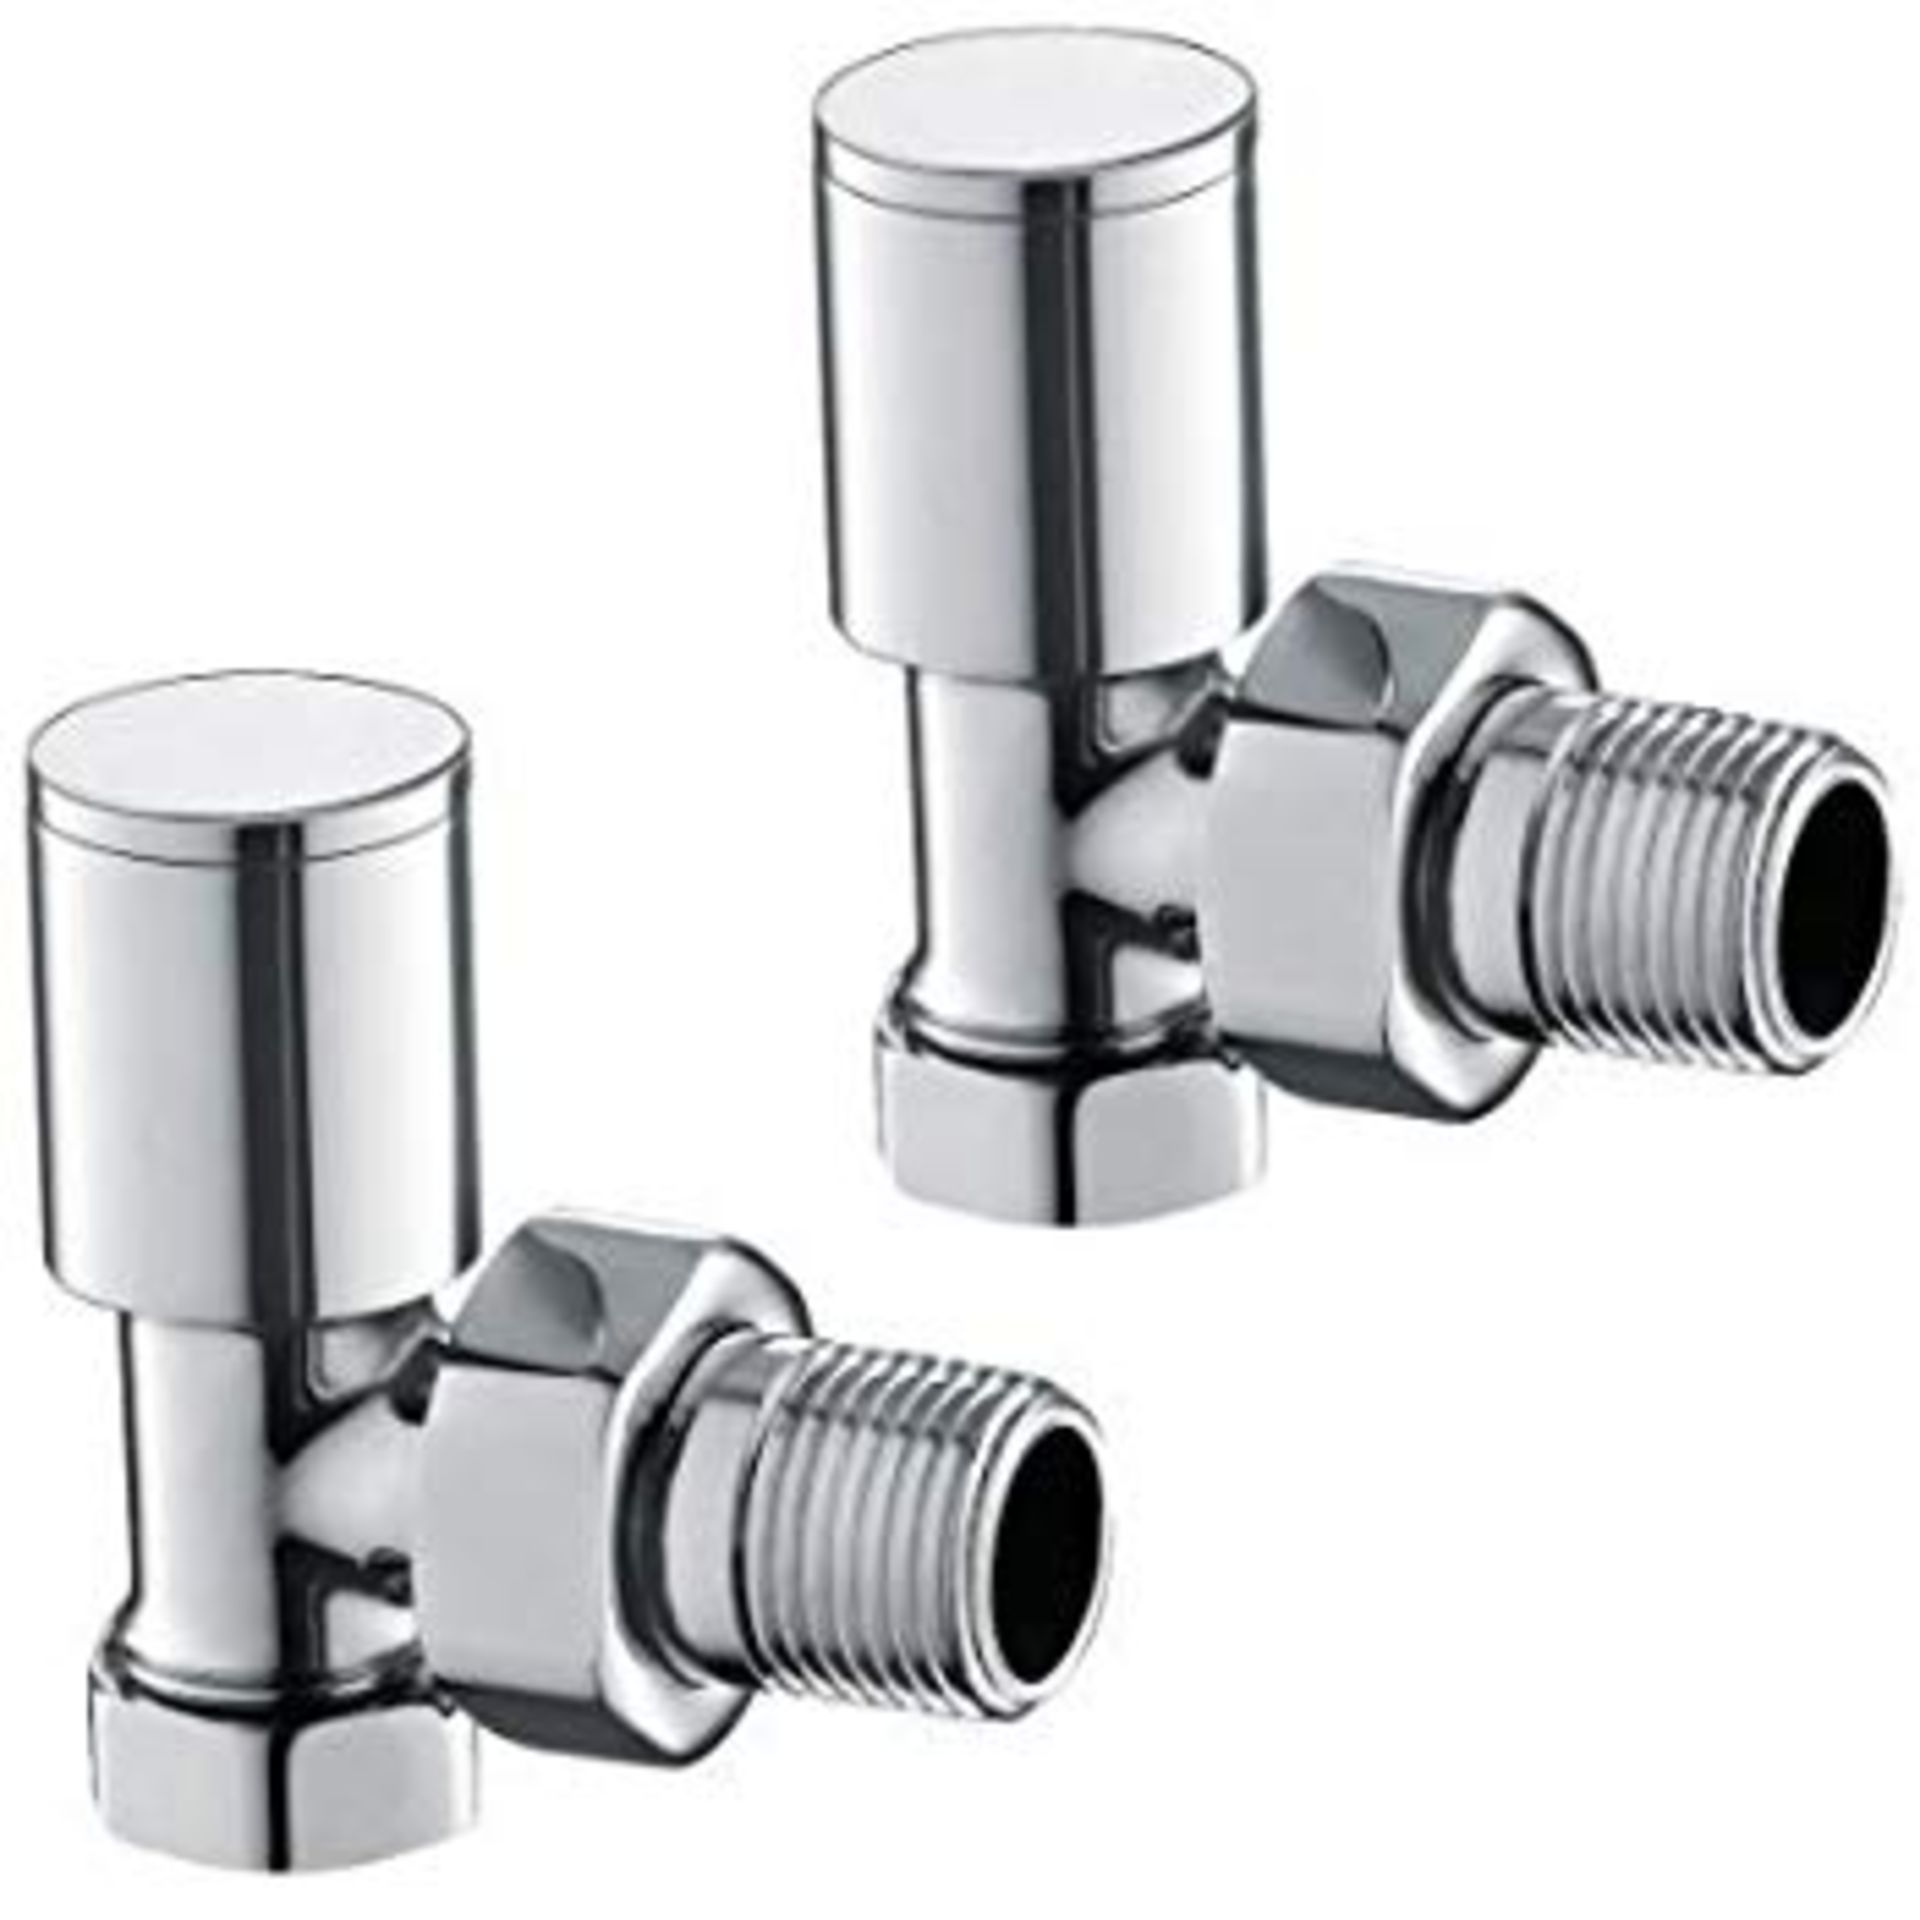 (AA1000) 15mm Standard Connection Angled Radiator Valves - Heavy Duty Polished Chrome Plated Br...